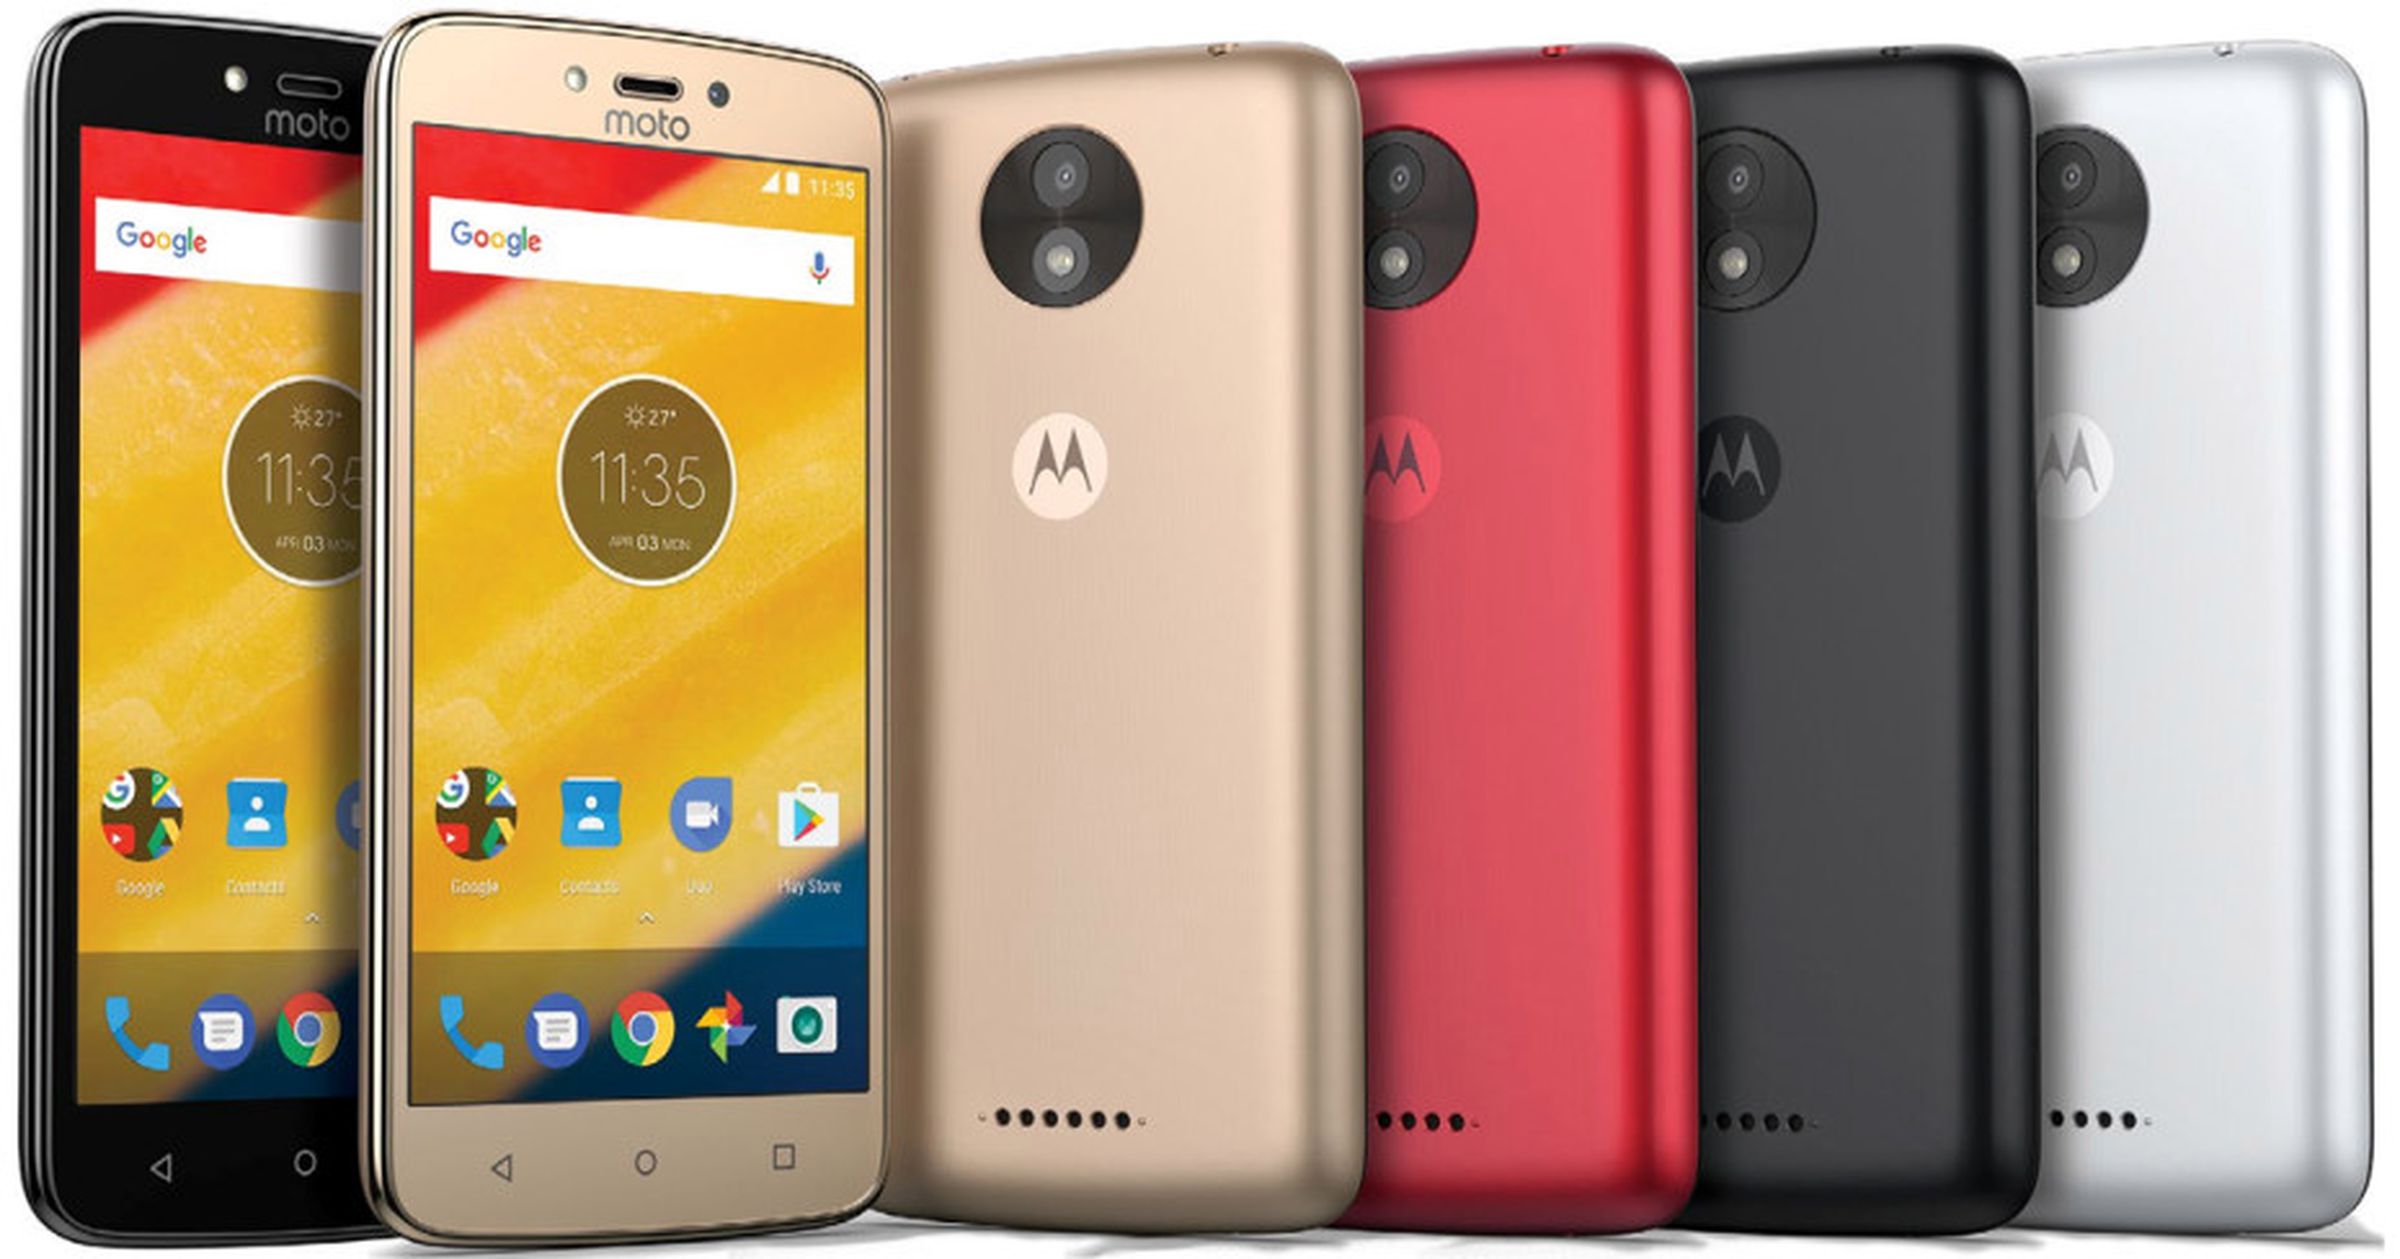 The Moto C and C Plus will be sold in multiple color options. 